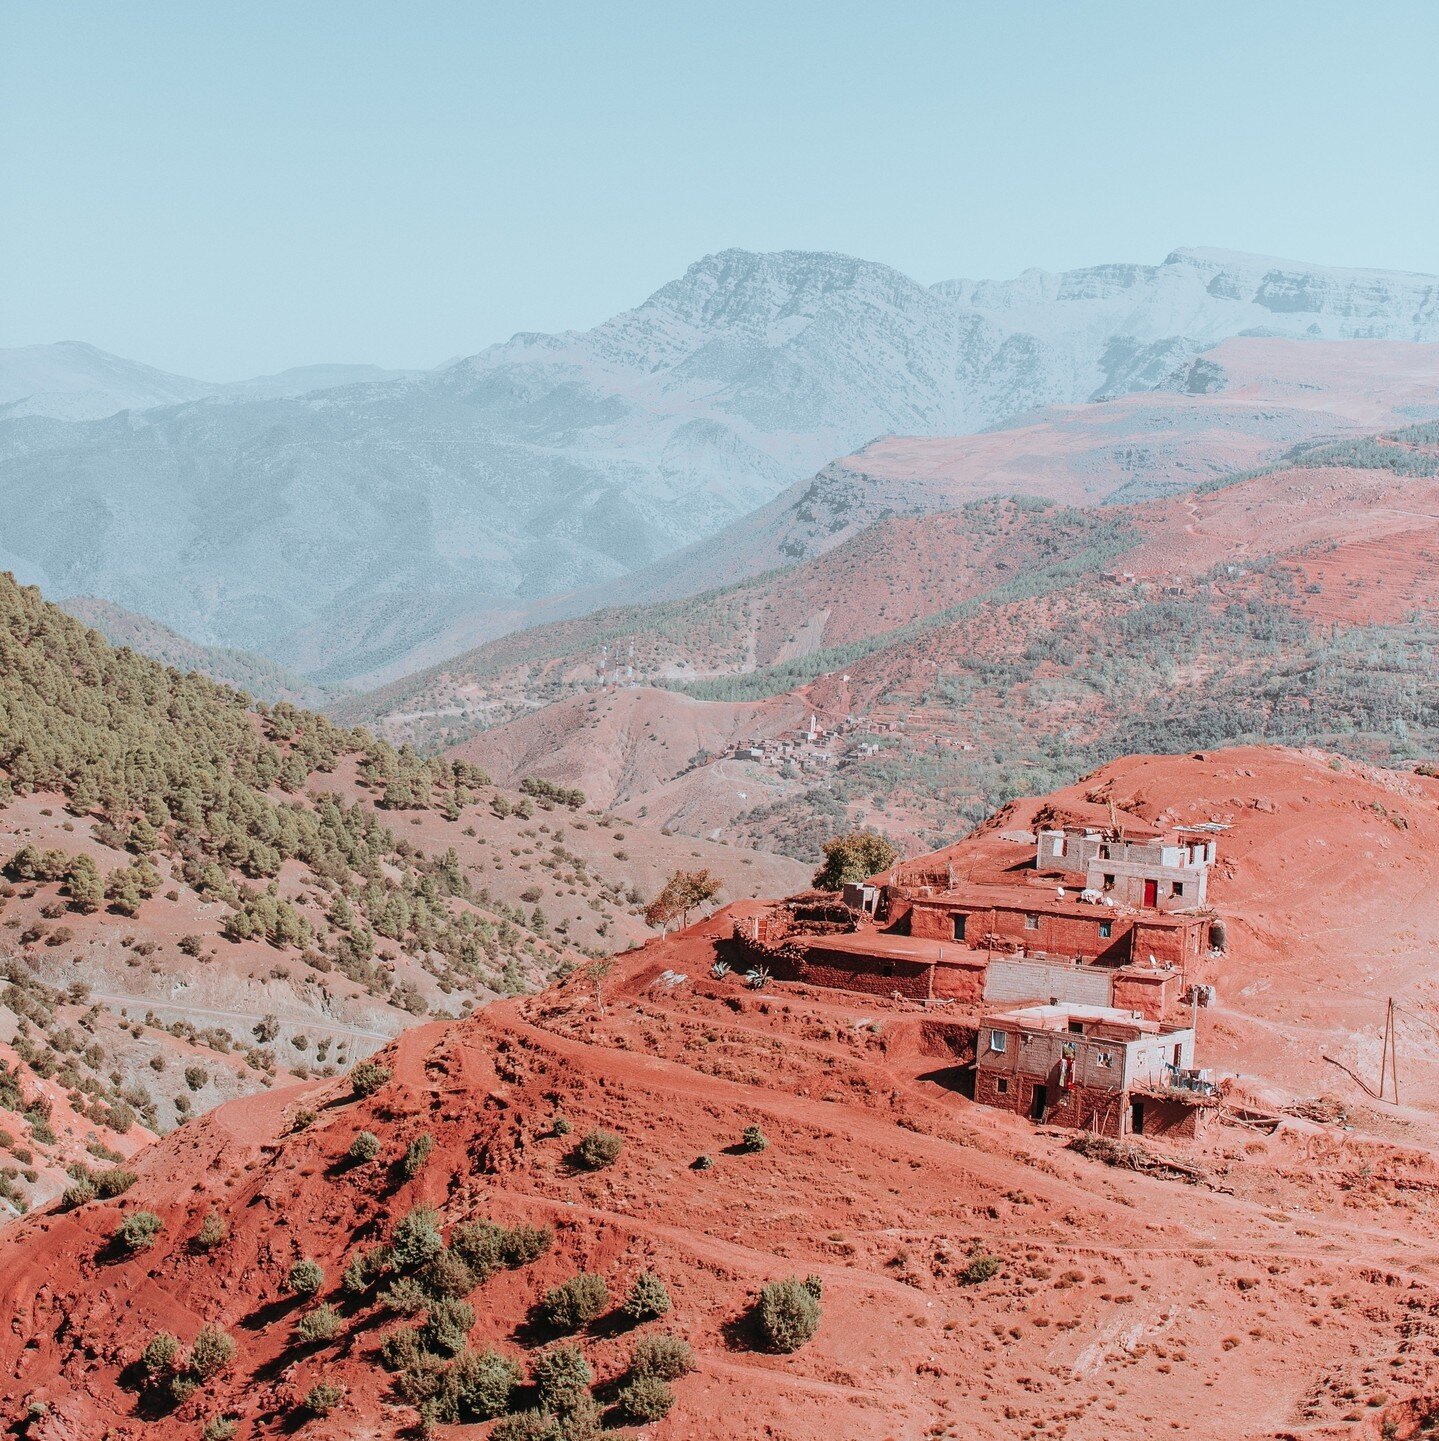 ATLAS VILLAGE INITIATIVE | Fundraising for Earthquake Victims in Morocco 🇲🇦 Our &quot;local initiative&quot; fundraiser is now live!⁠
⁠
&ldquo;A man&rsquo;s home is his castle&rdquo; &ndash; a direct impact campaign that aims to empower local commu